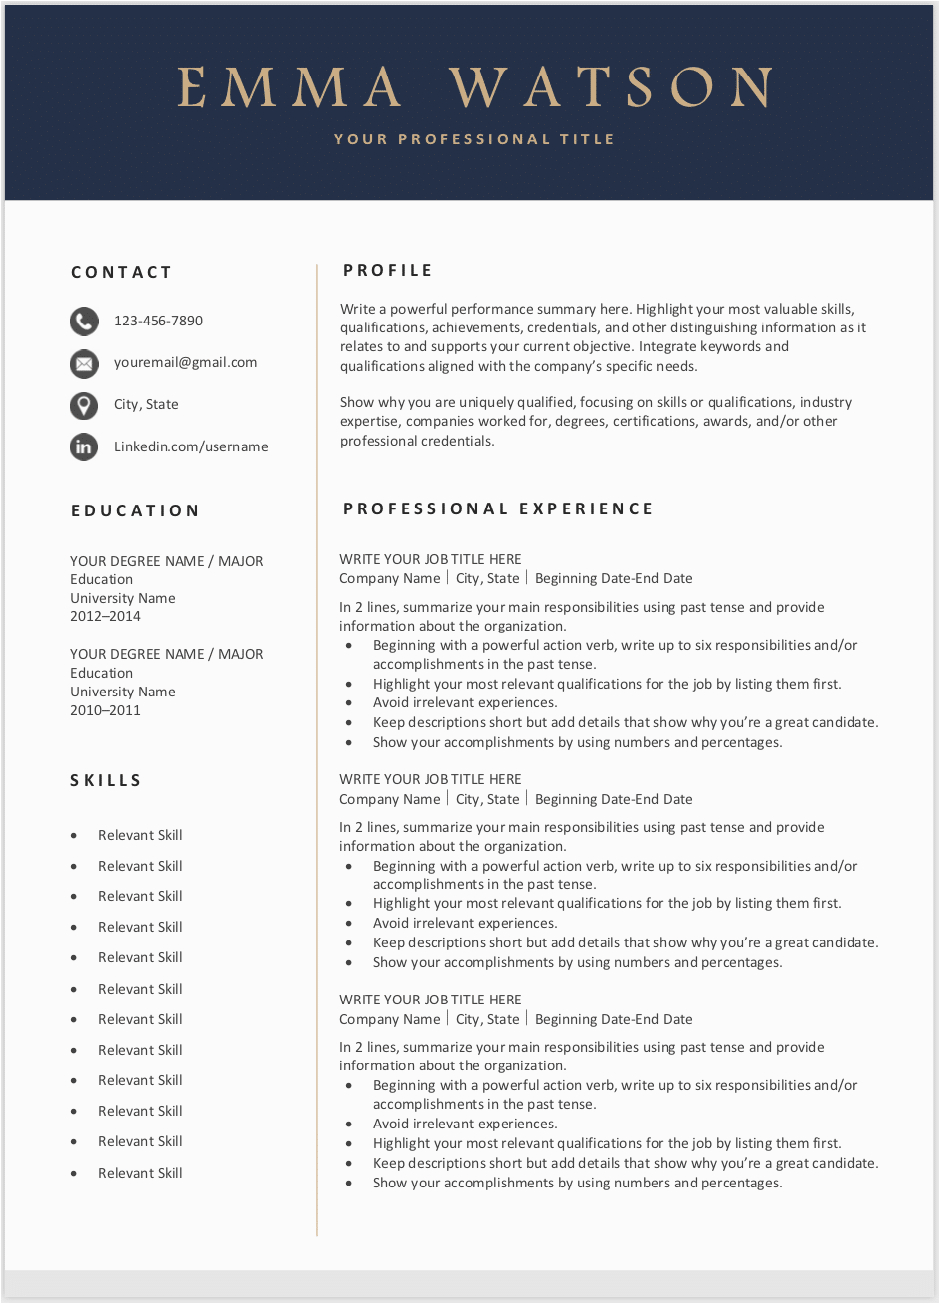 Free Easy to Use Resume Templates Modern Resume Template Download for Free